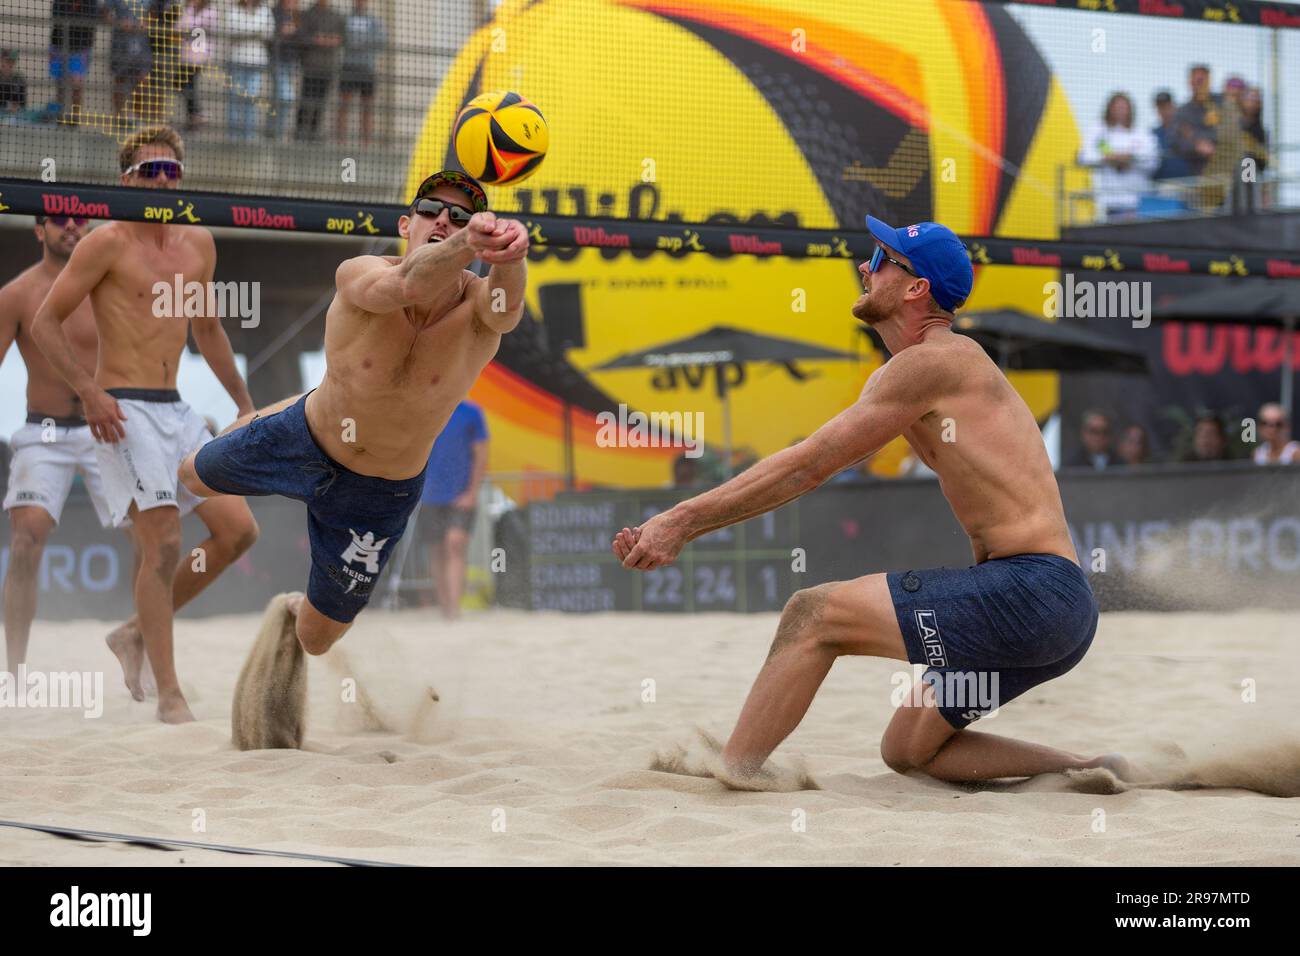 Tri Bourne lunges to dig the ball as Chaim Schalk looks on during the semifinal match of the AVP Huntington Beach Open (John Geldermann/Alamy) Stock Photo